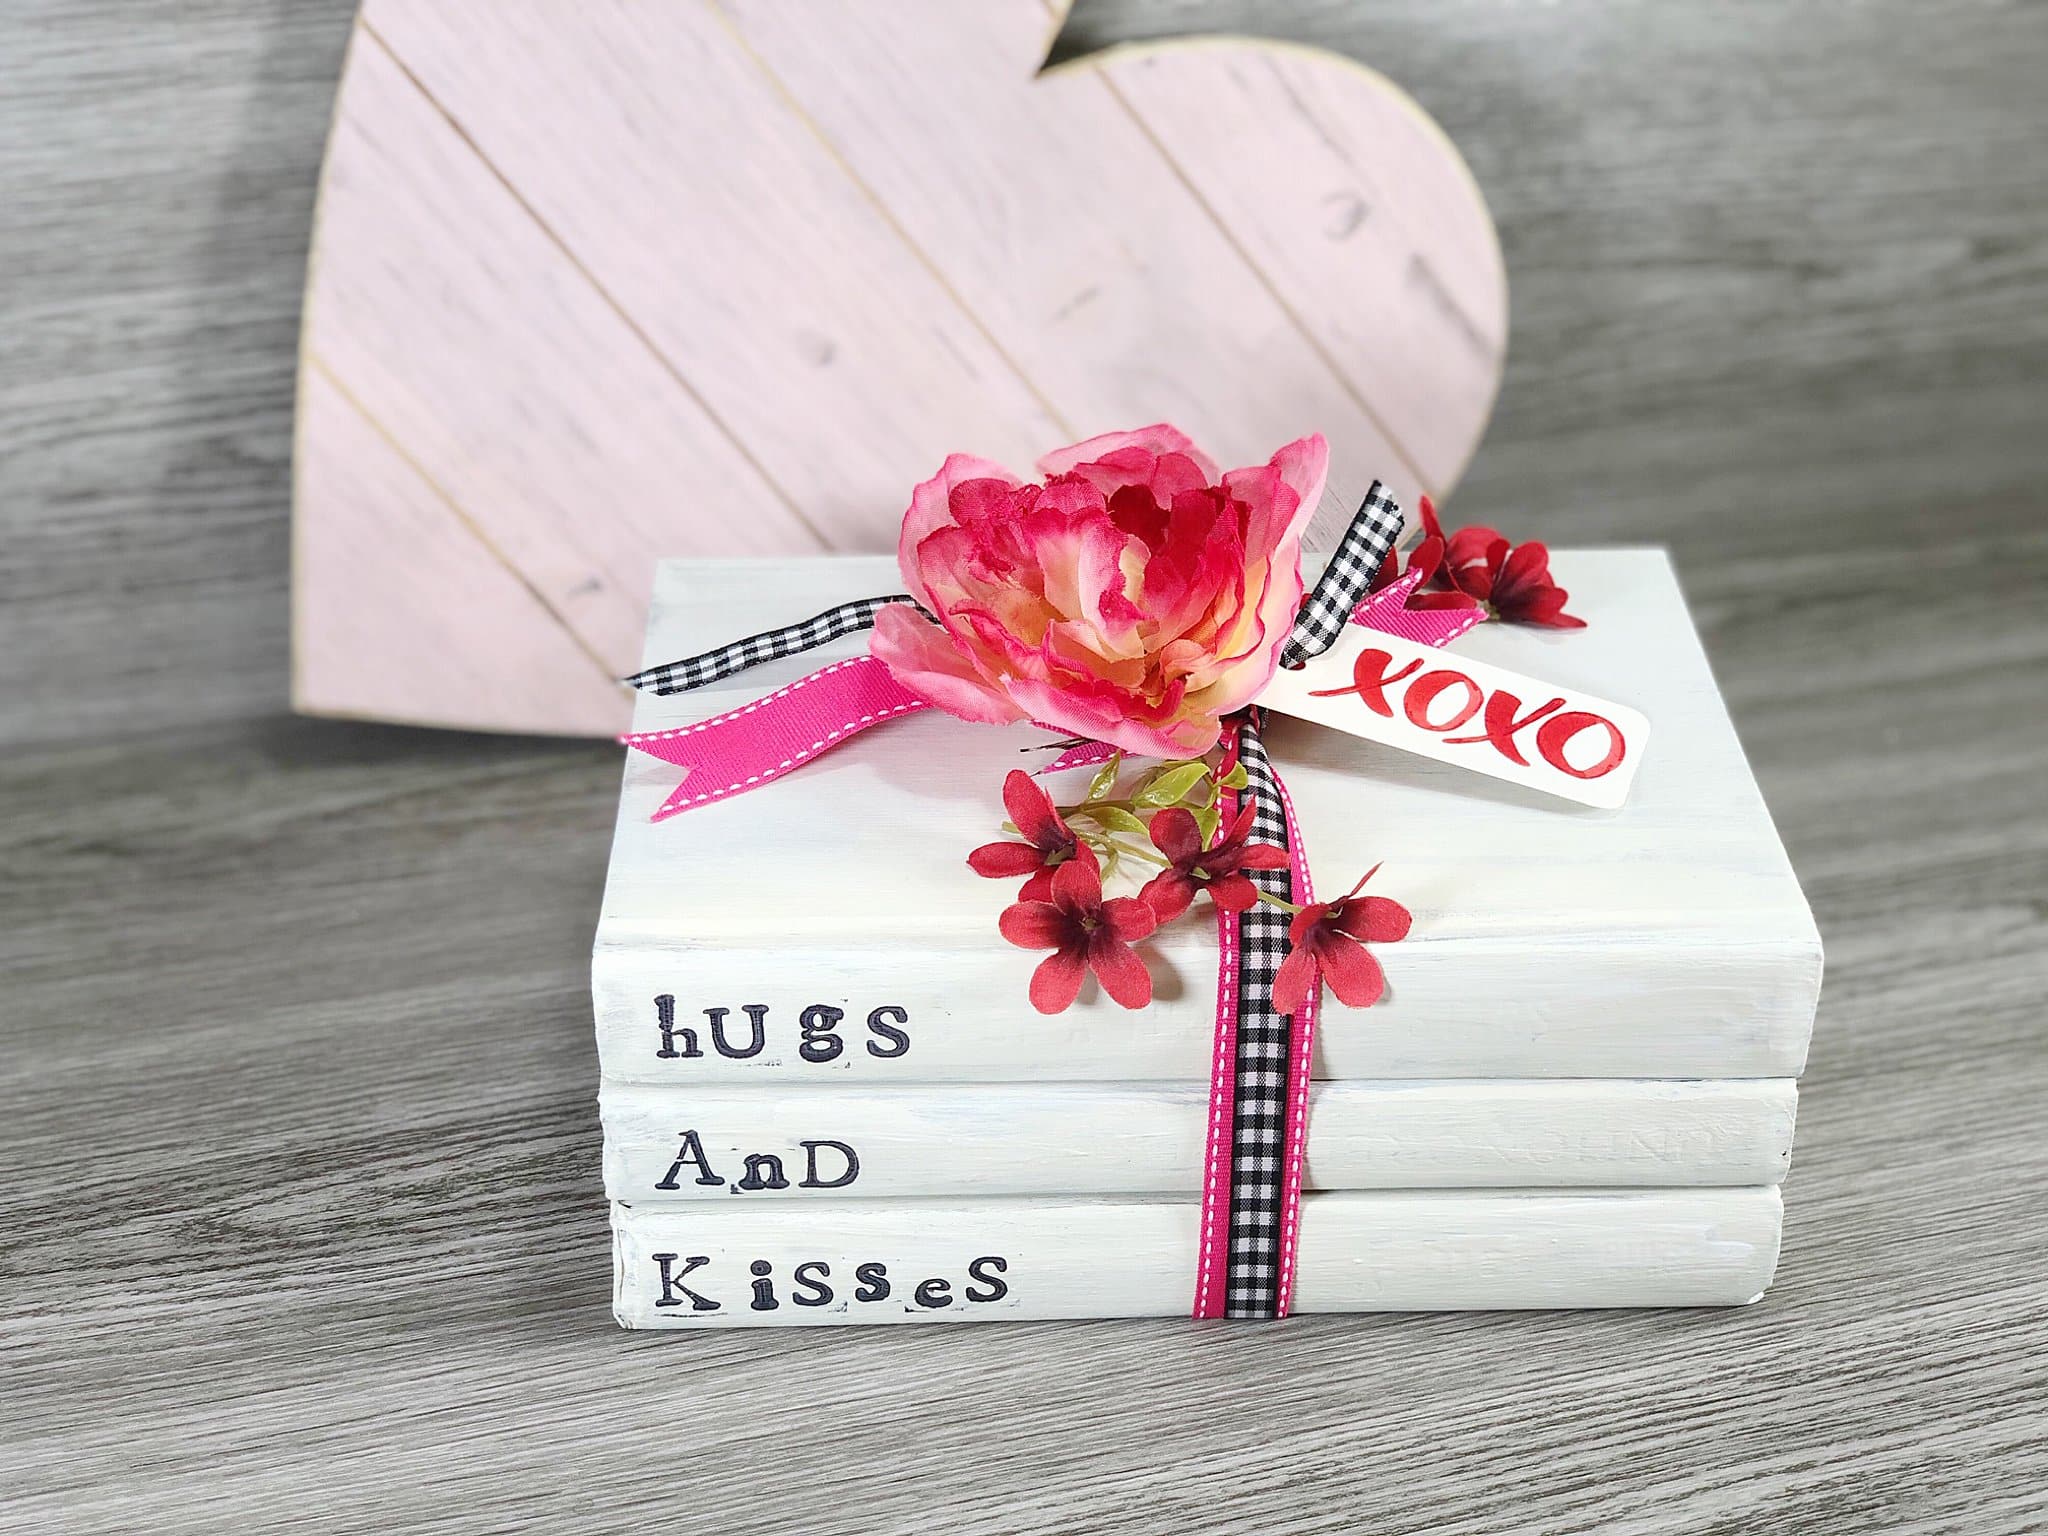 How to Make Stamped Books for Your Love on Valentine's Day